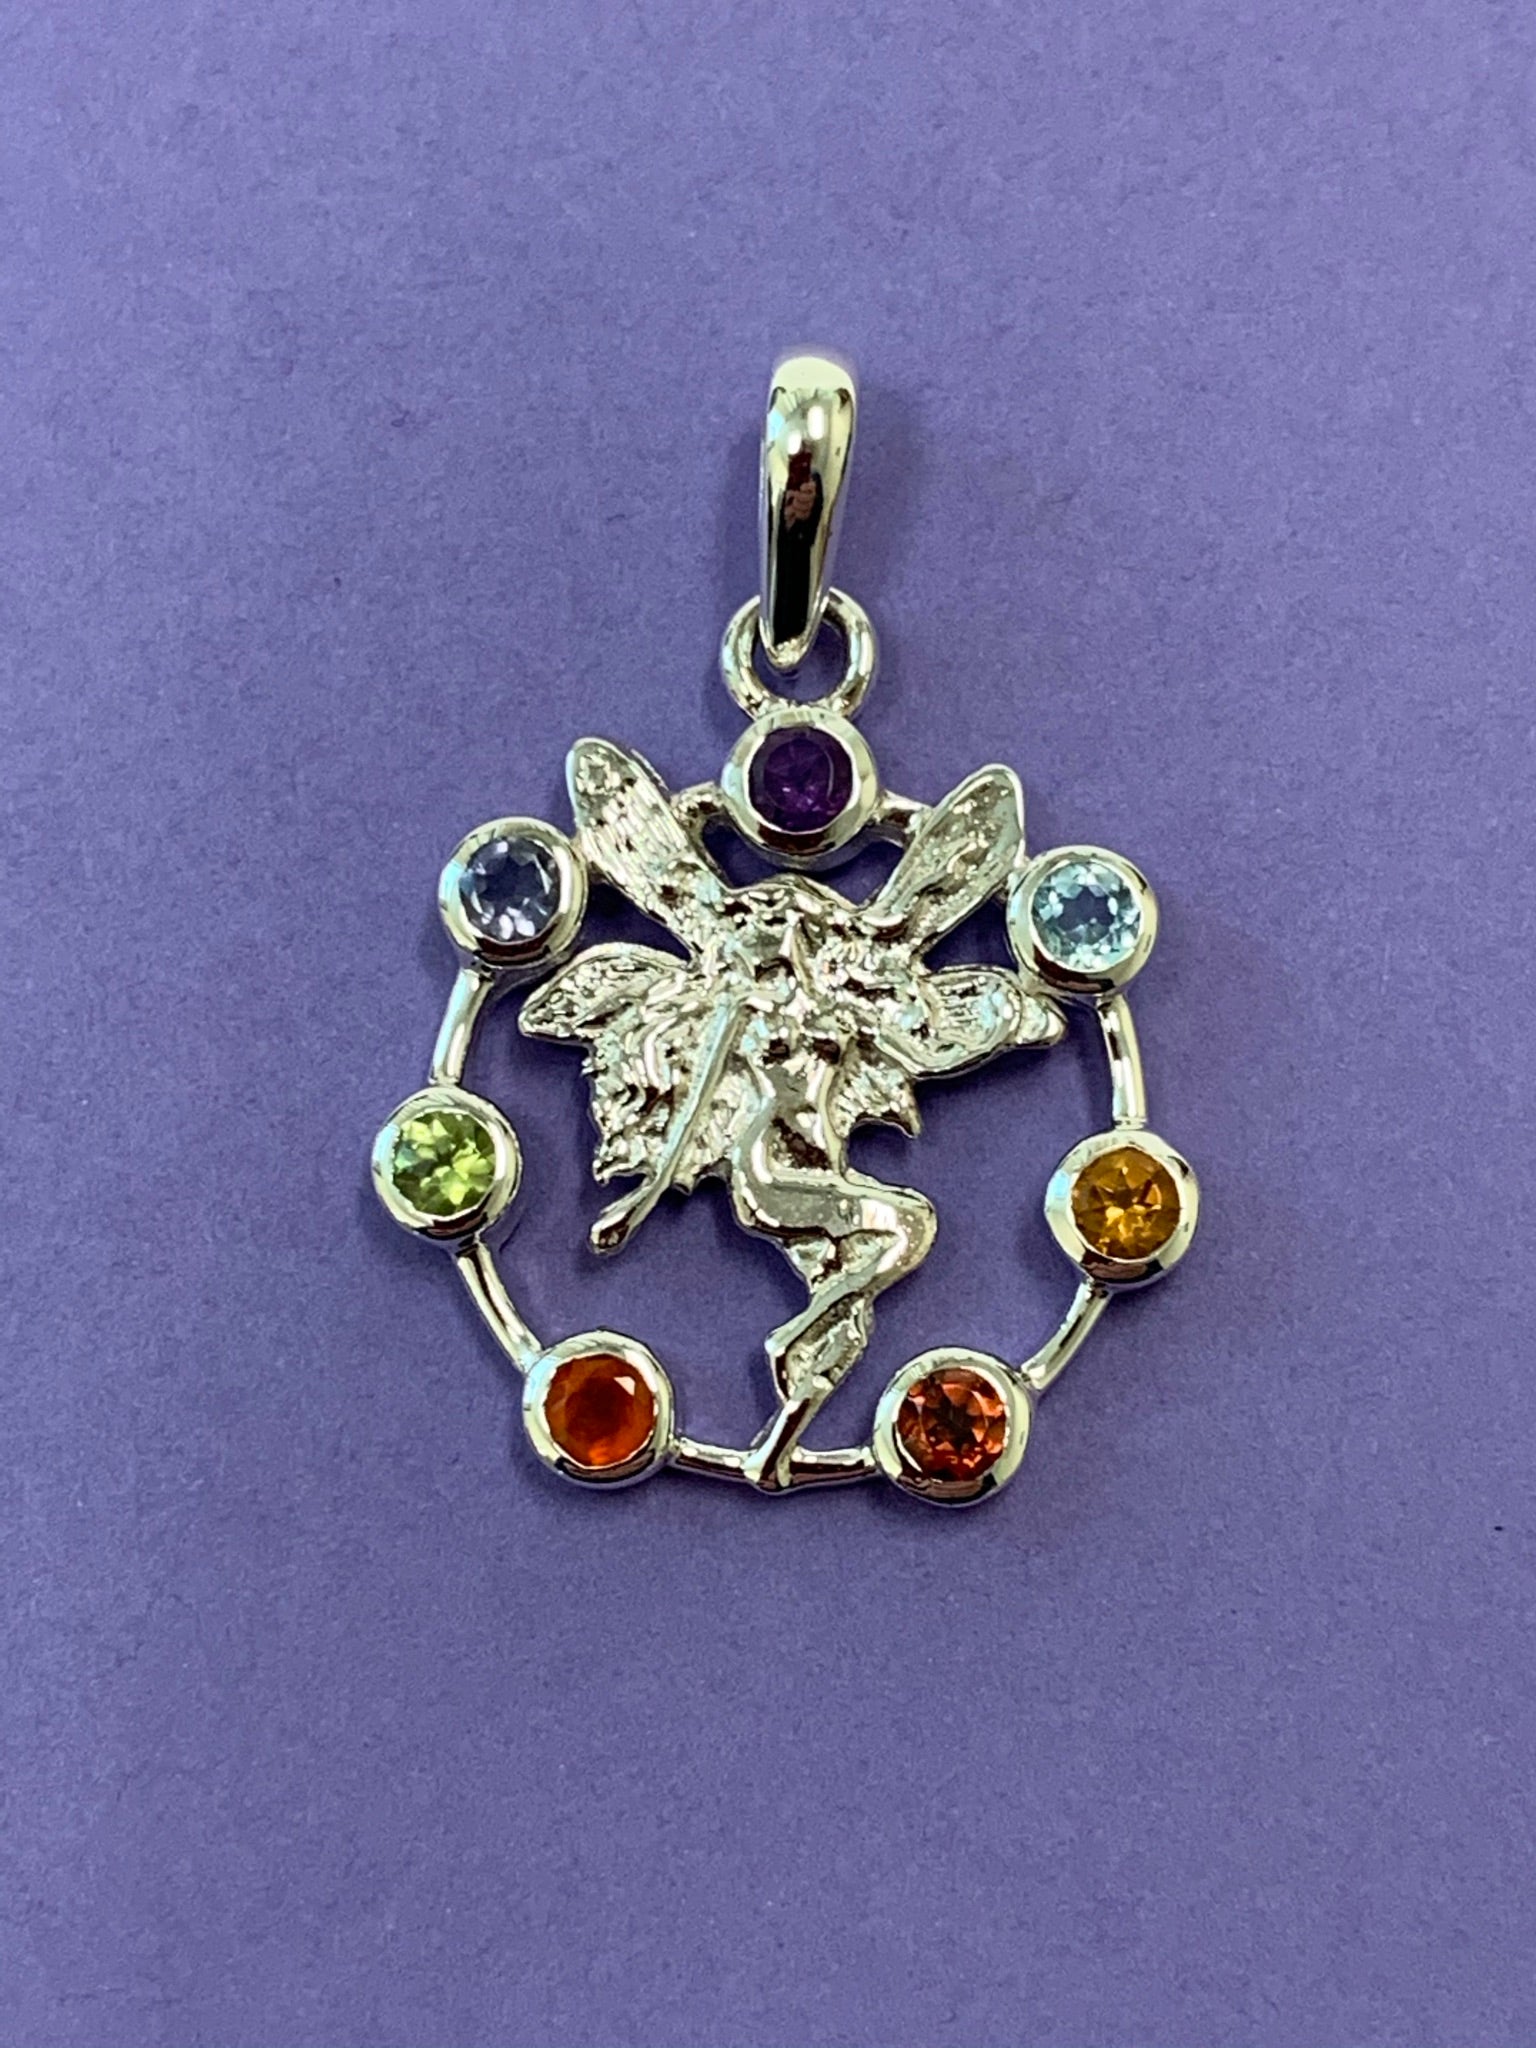 Another view of the Chakra fairy pendant. Small faceted stones represent each of the chakras: amethyst/crown, iolite/third eye, blue topaz/throat, peridot/heart, citrine/solar plexus, carnelian/sacral (or naval), garnet/root (or base). These small, faceted stones are set around an open sterling silver circle. A sterling silver fairy extends through the center of the circle. Her wings reach a bit beyond the top of the circle and her feet touch the bottom. Pendant is approximately 1".